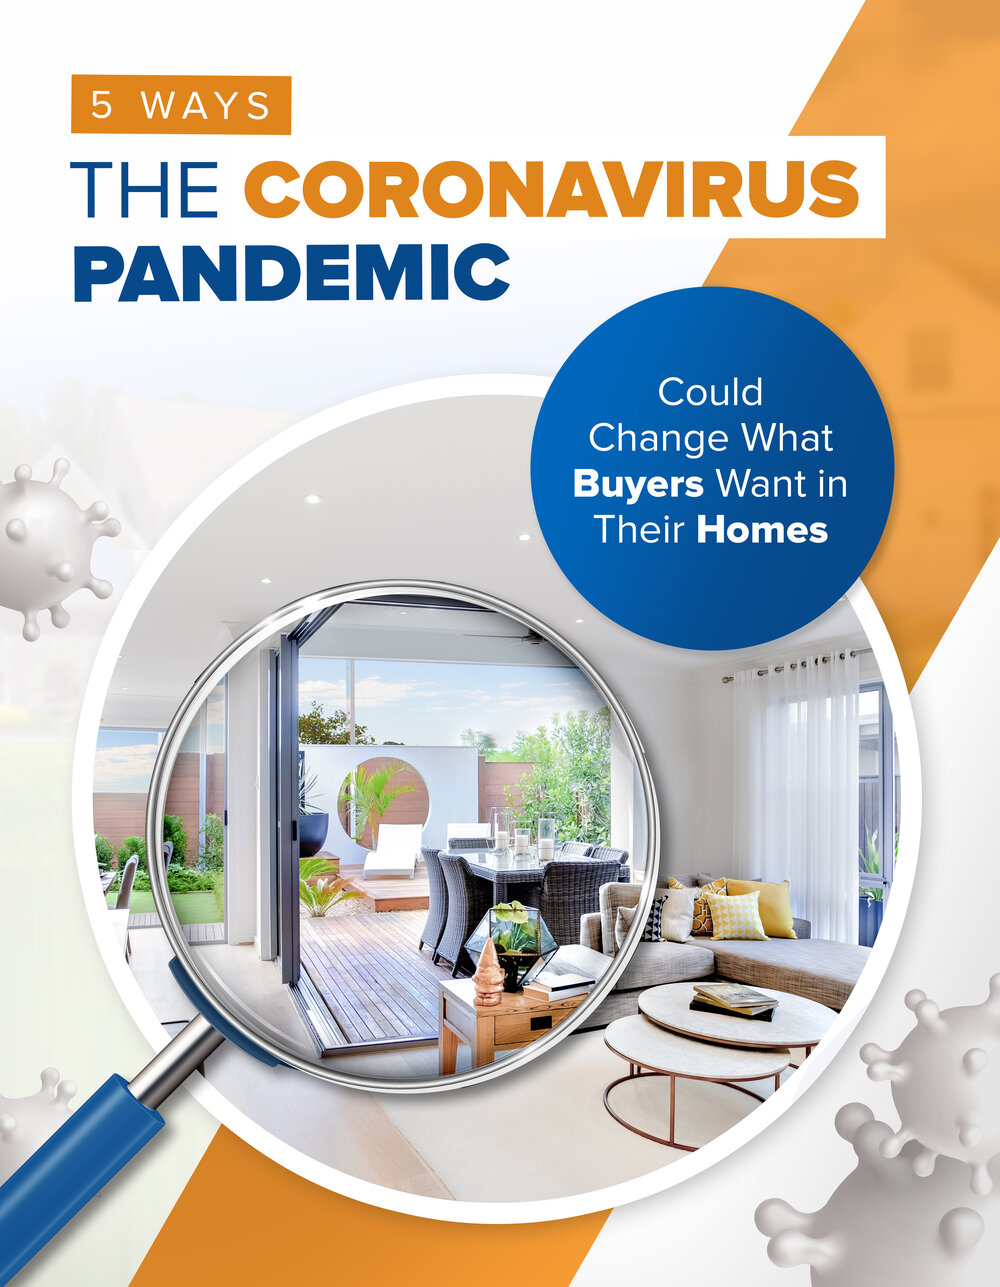 5 Ways the Coronavirus Pandemic Could Change What Buyers Want in Their Homes